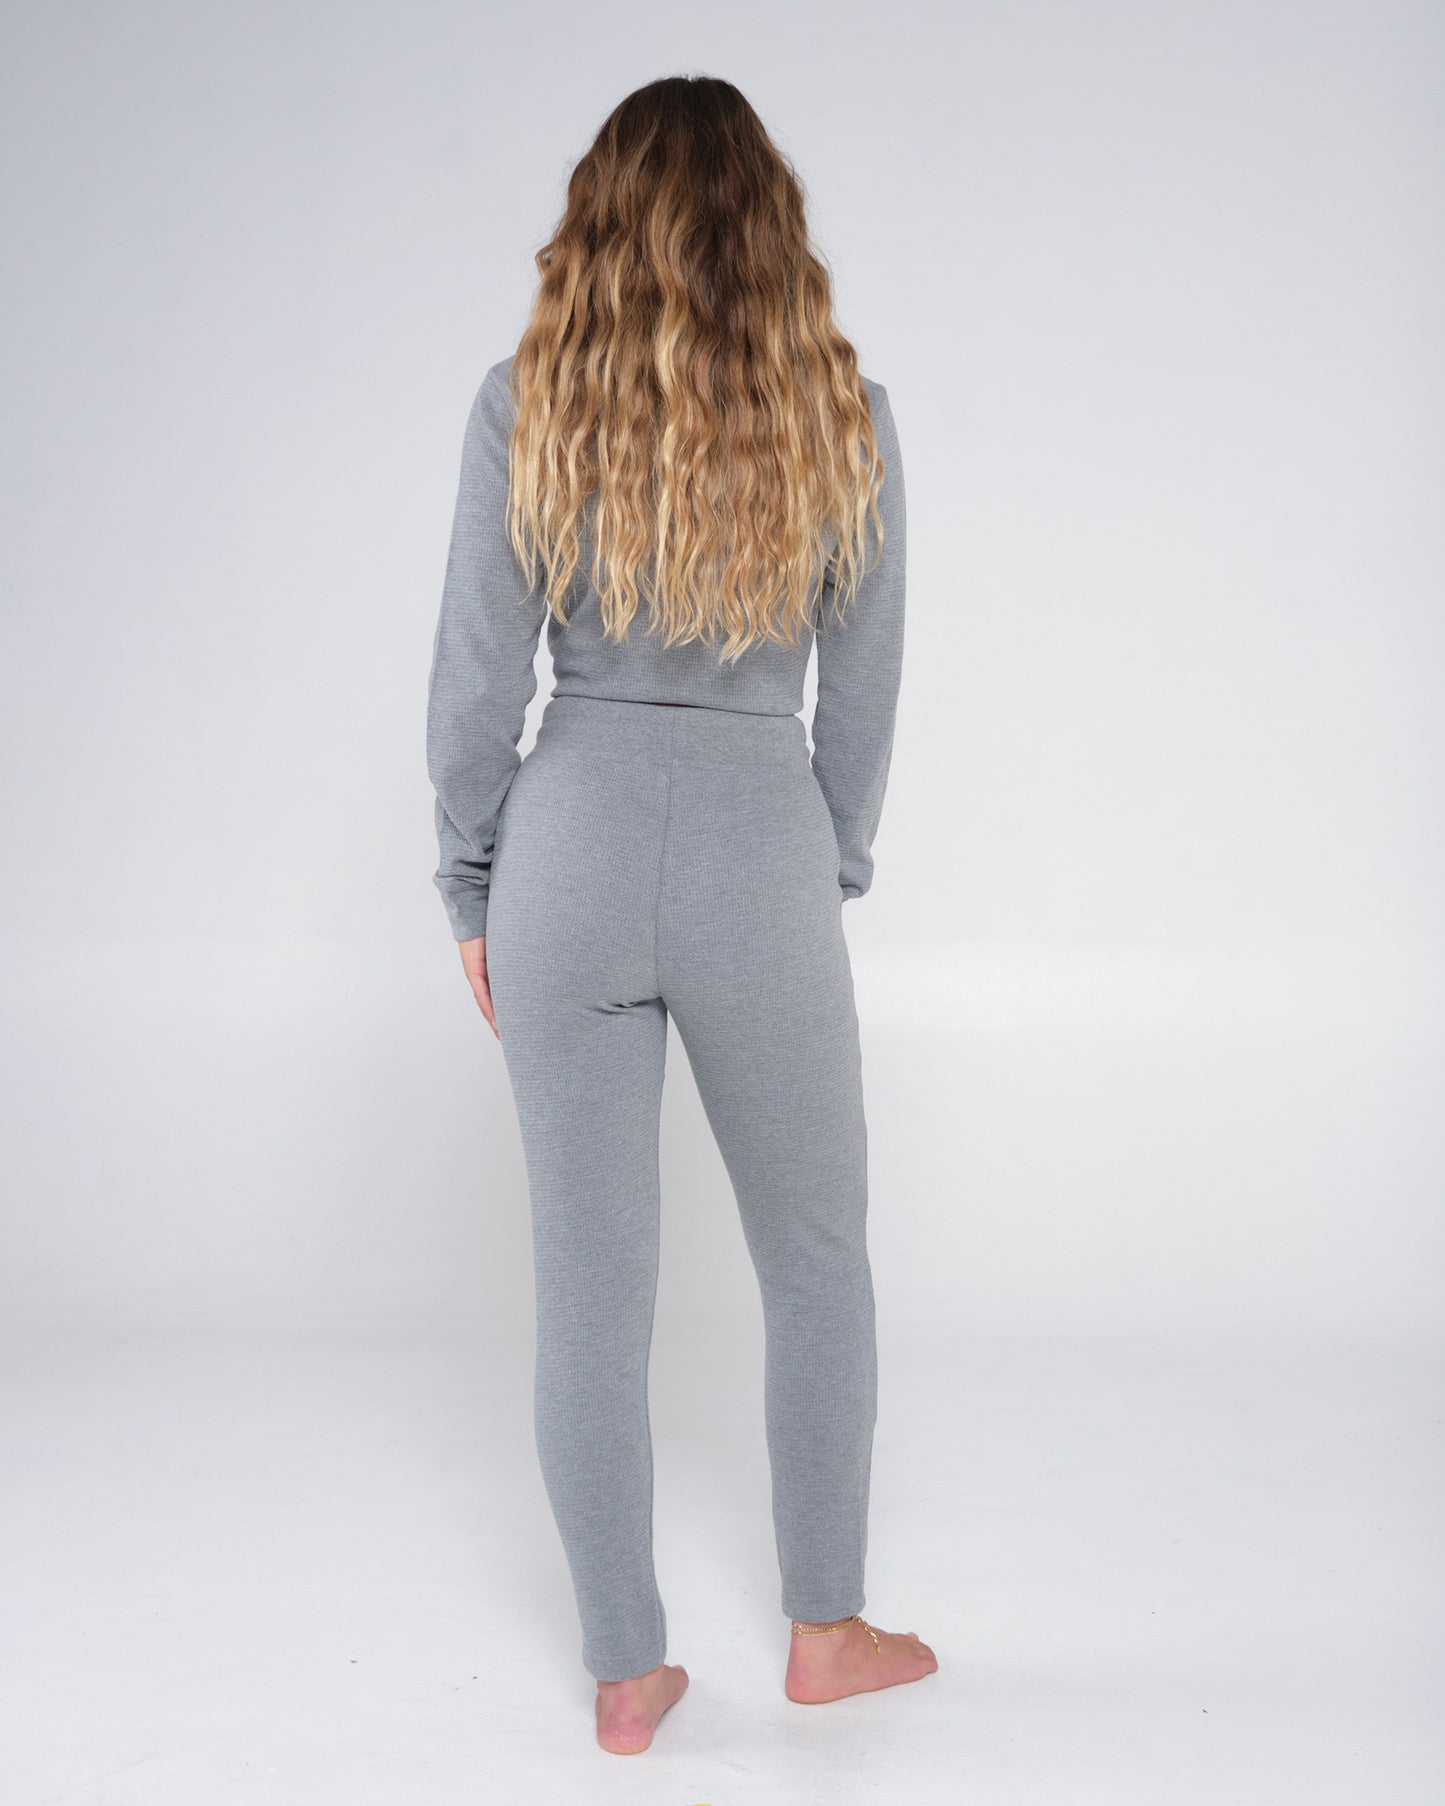 On body back of the Tippet Heather Grey Pant